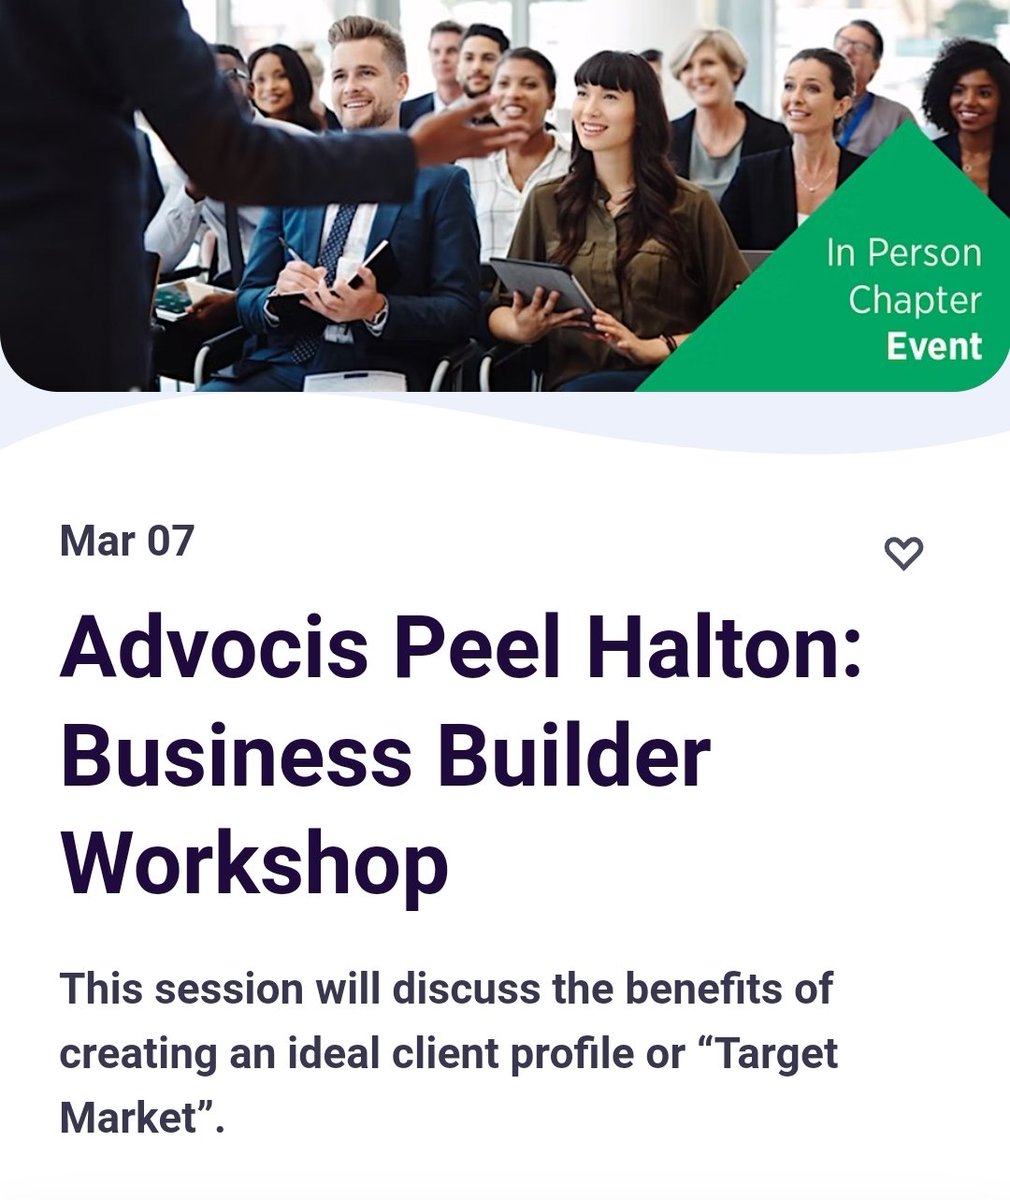 Business Builder Workshop

With Brent Swatuk @equitablelife

Pipeline problems, Pipeline running dry, just can’t seem to attract the right clients? 

Tuesday March 7, 2023 
from 8:30 A.M. to 11:00 A.M. (EST)

Register here: lnkd.in/gv6PS7cr